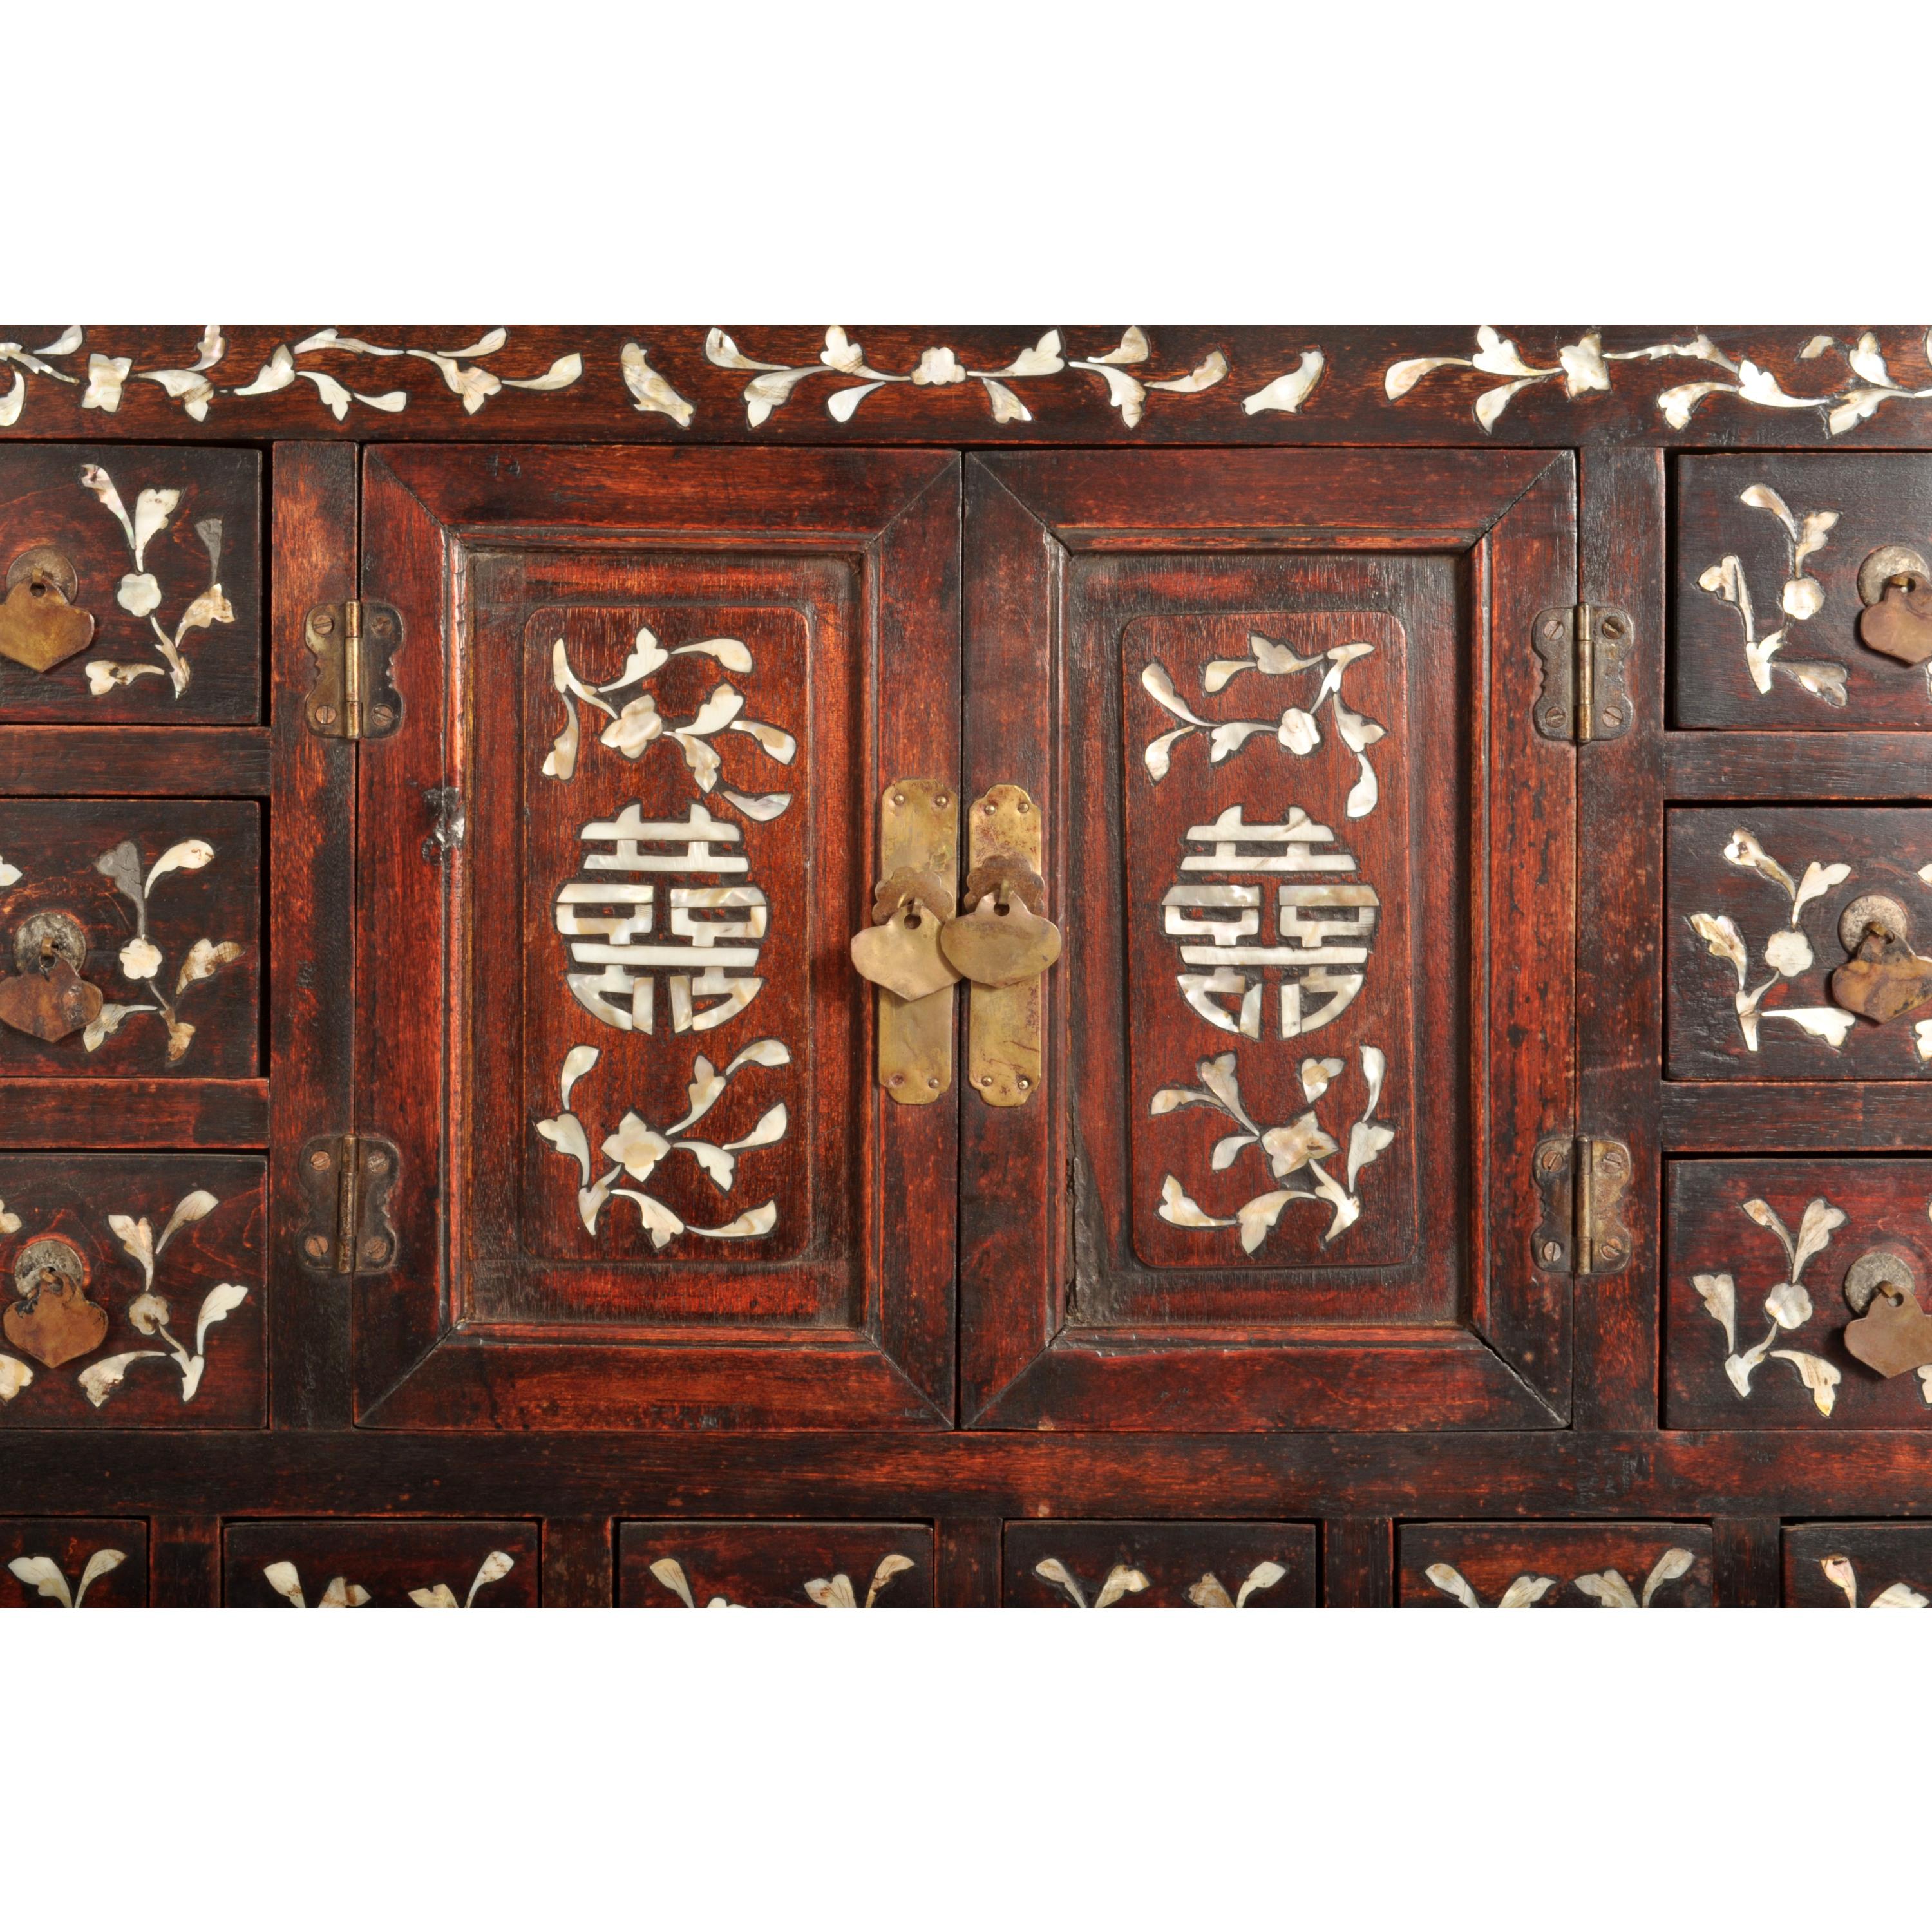 Antique Chinese Qing Rosewood Mother-of-Pearl Inlaid Apothecary Cabinet 1850 8